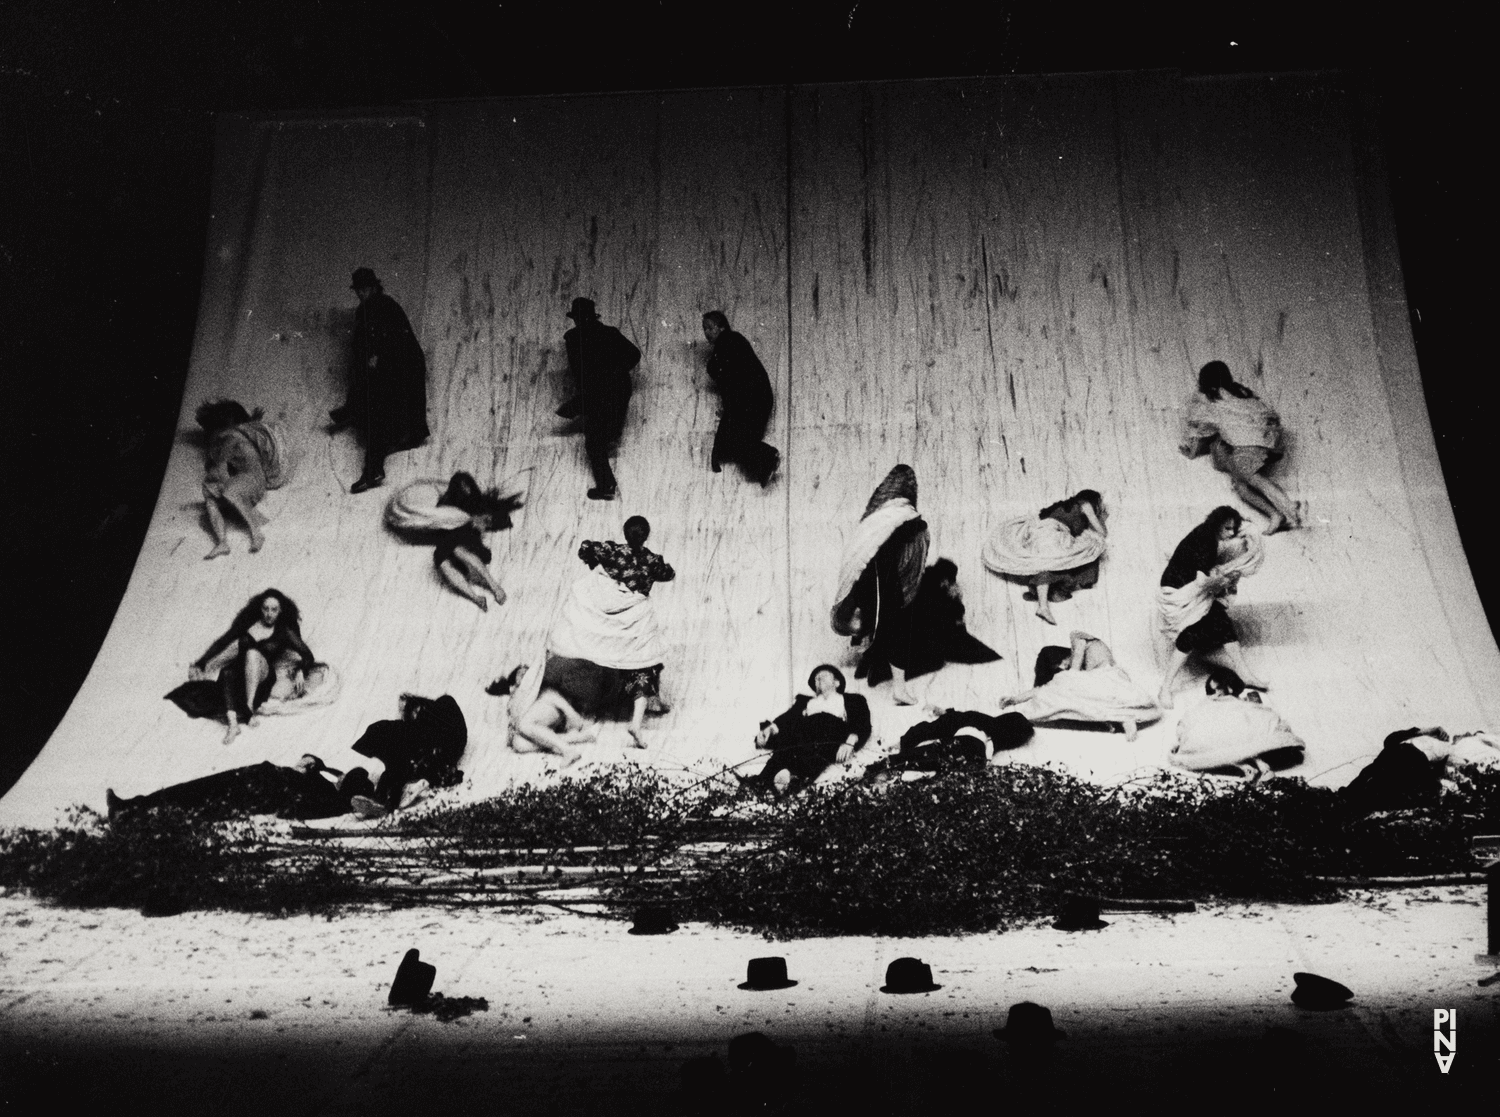 “Come Dance With Me” by Pina Bausch